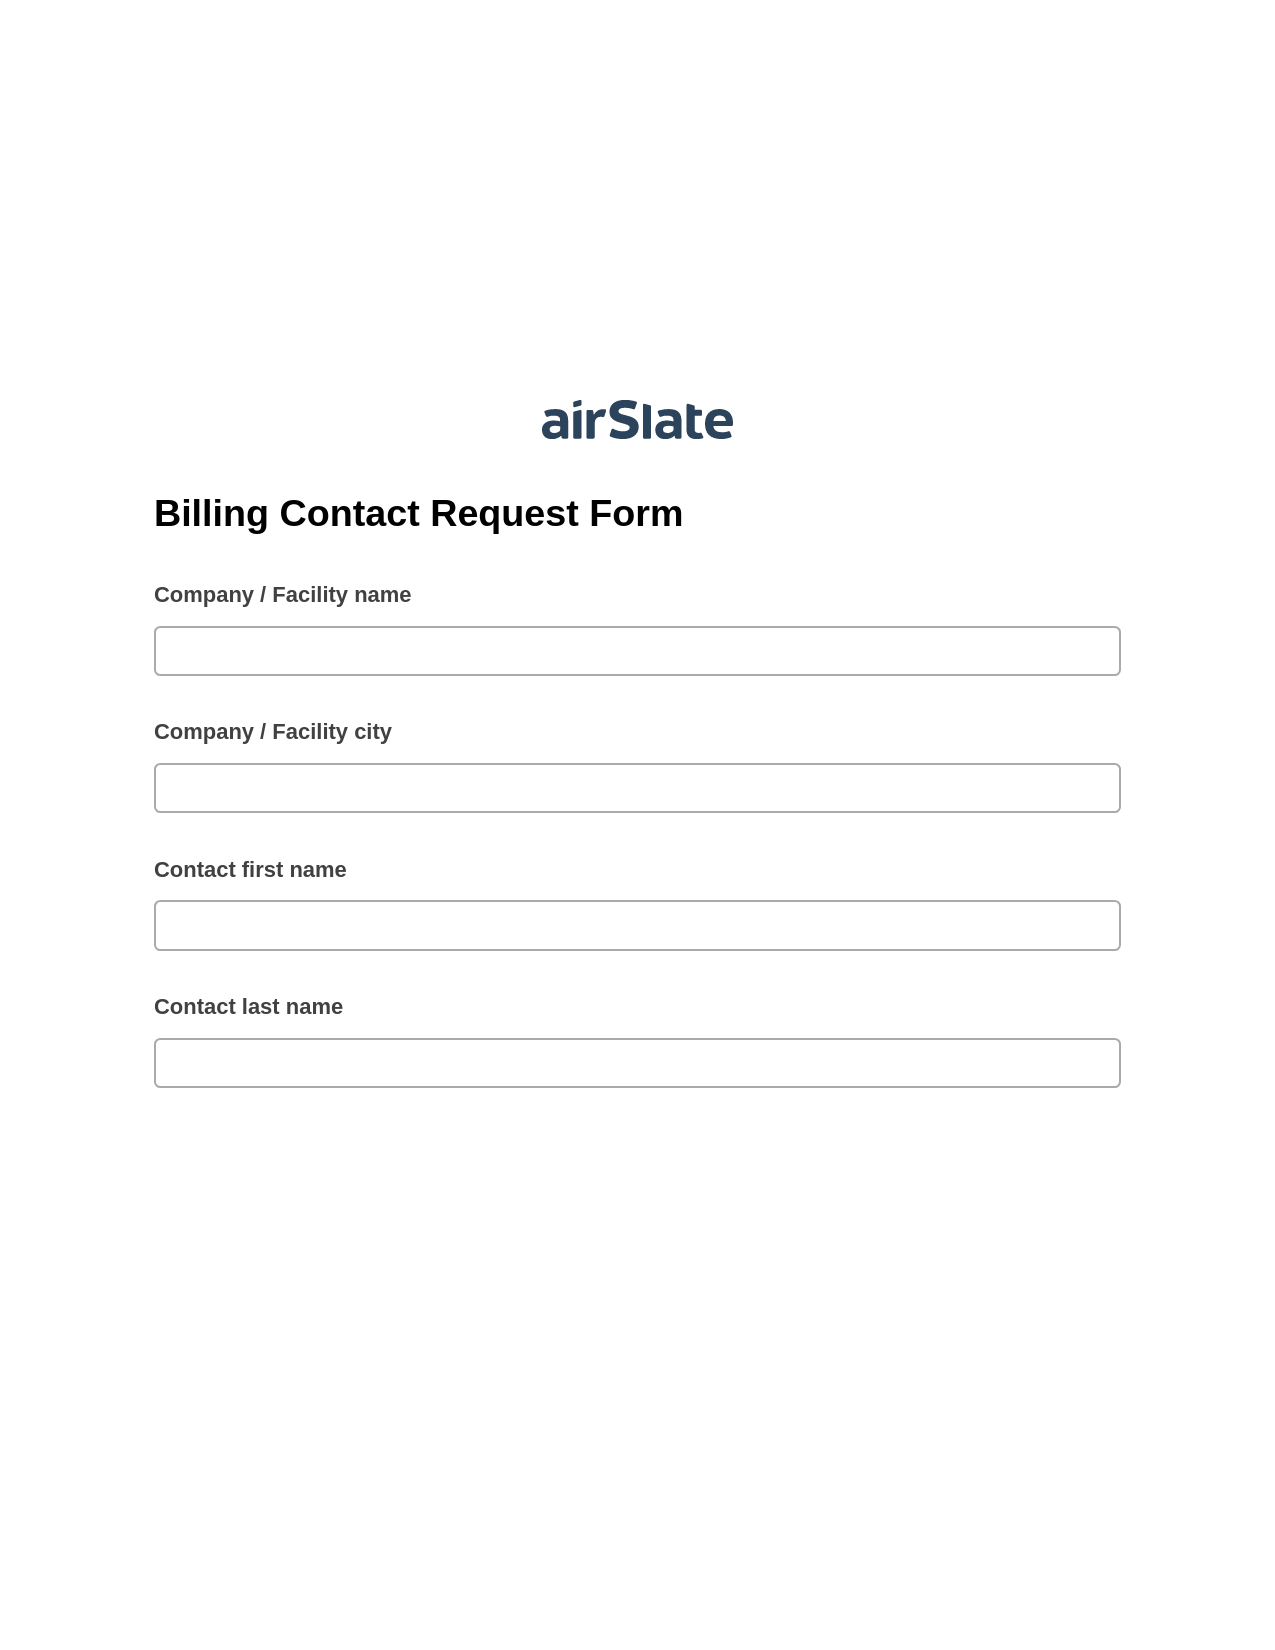 Multirole Billing Contact Request Form System Bot - Slack Two-Way Binding Bot, Create slate addon, Slack Two-Way Binding Bot